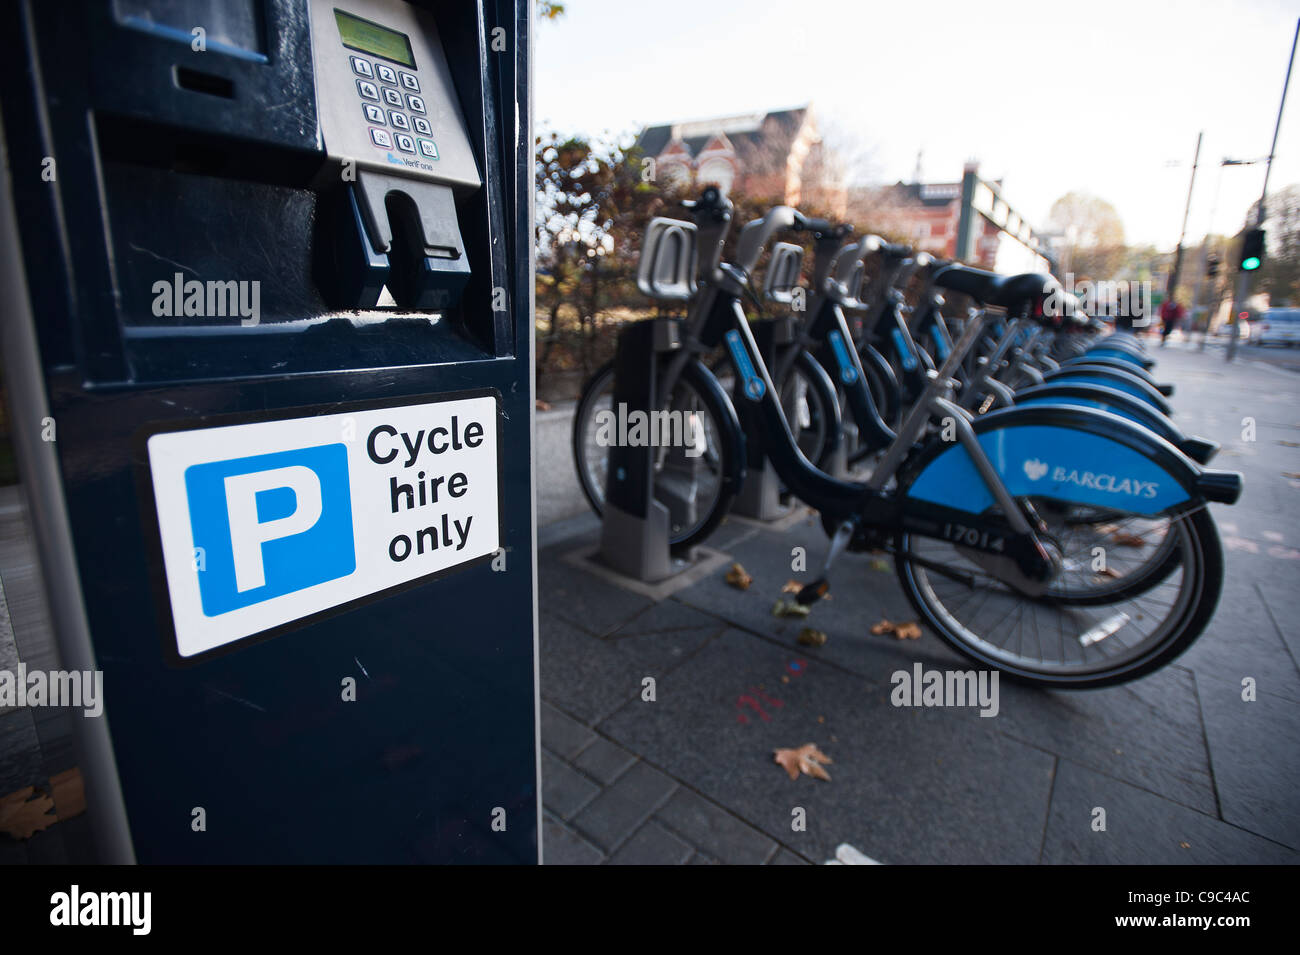 Barclays Pedal Cycles at a stand at Tooley Street, South East London, England, United Kingdom Stock Photo